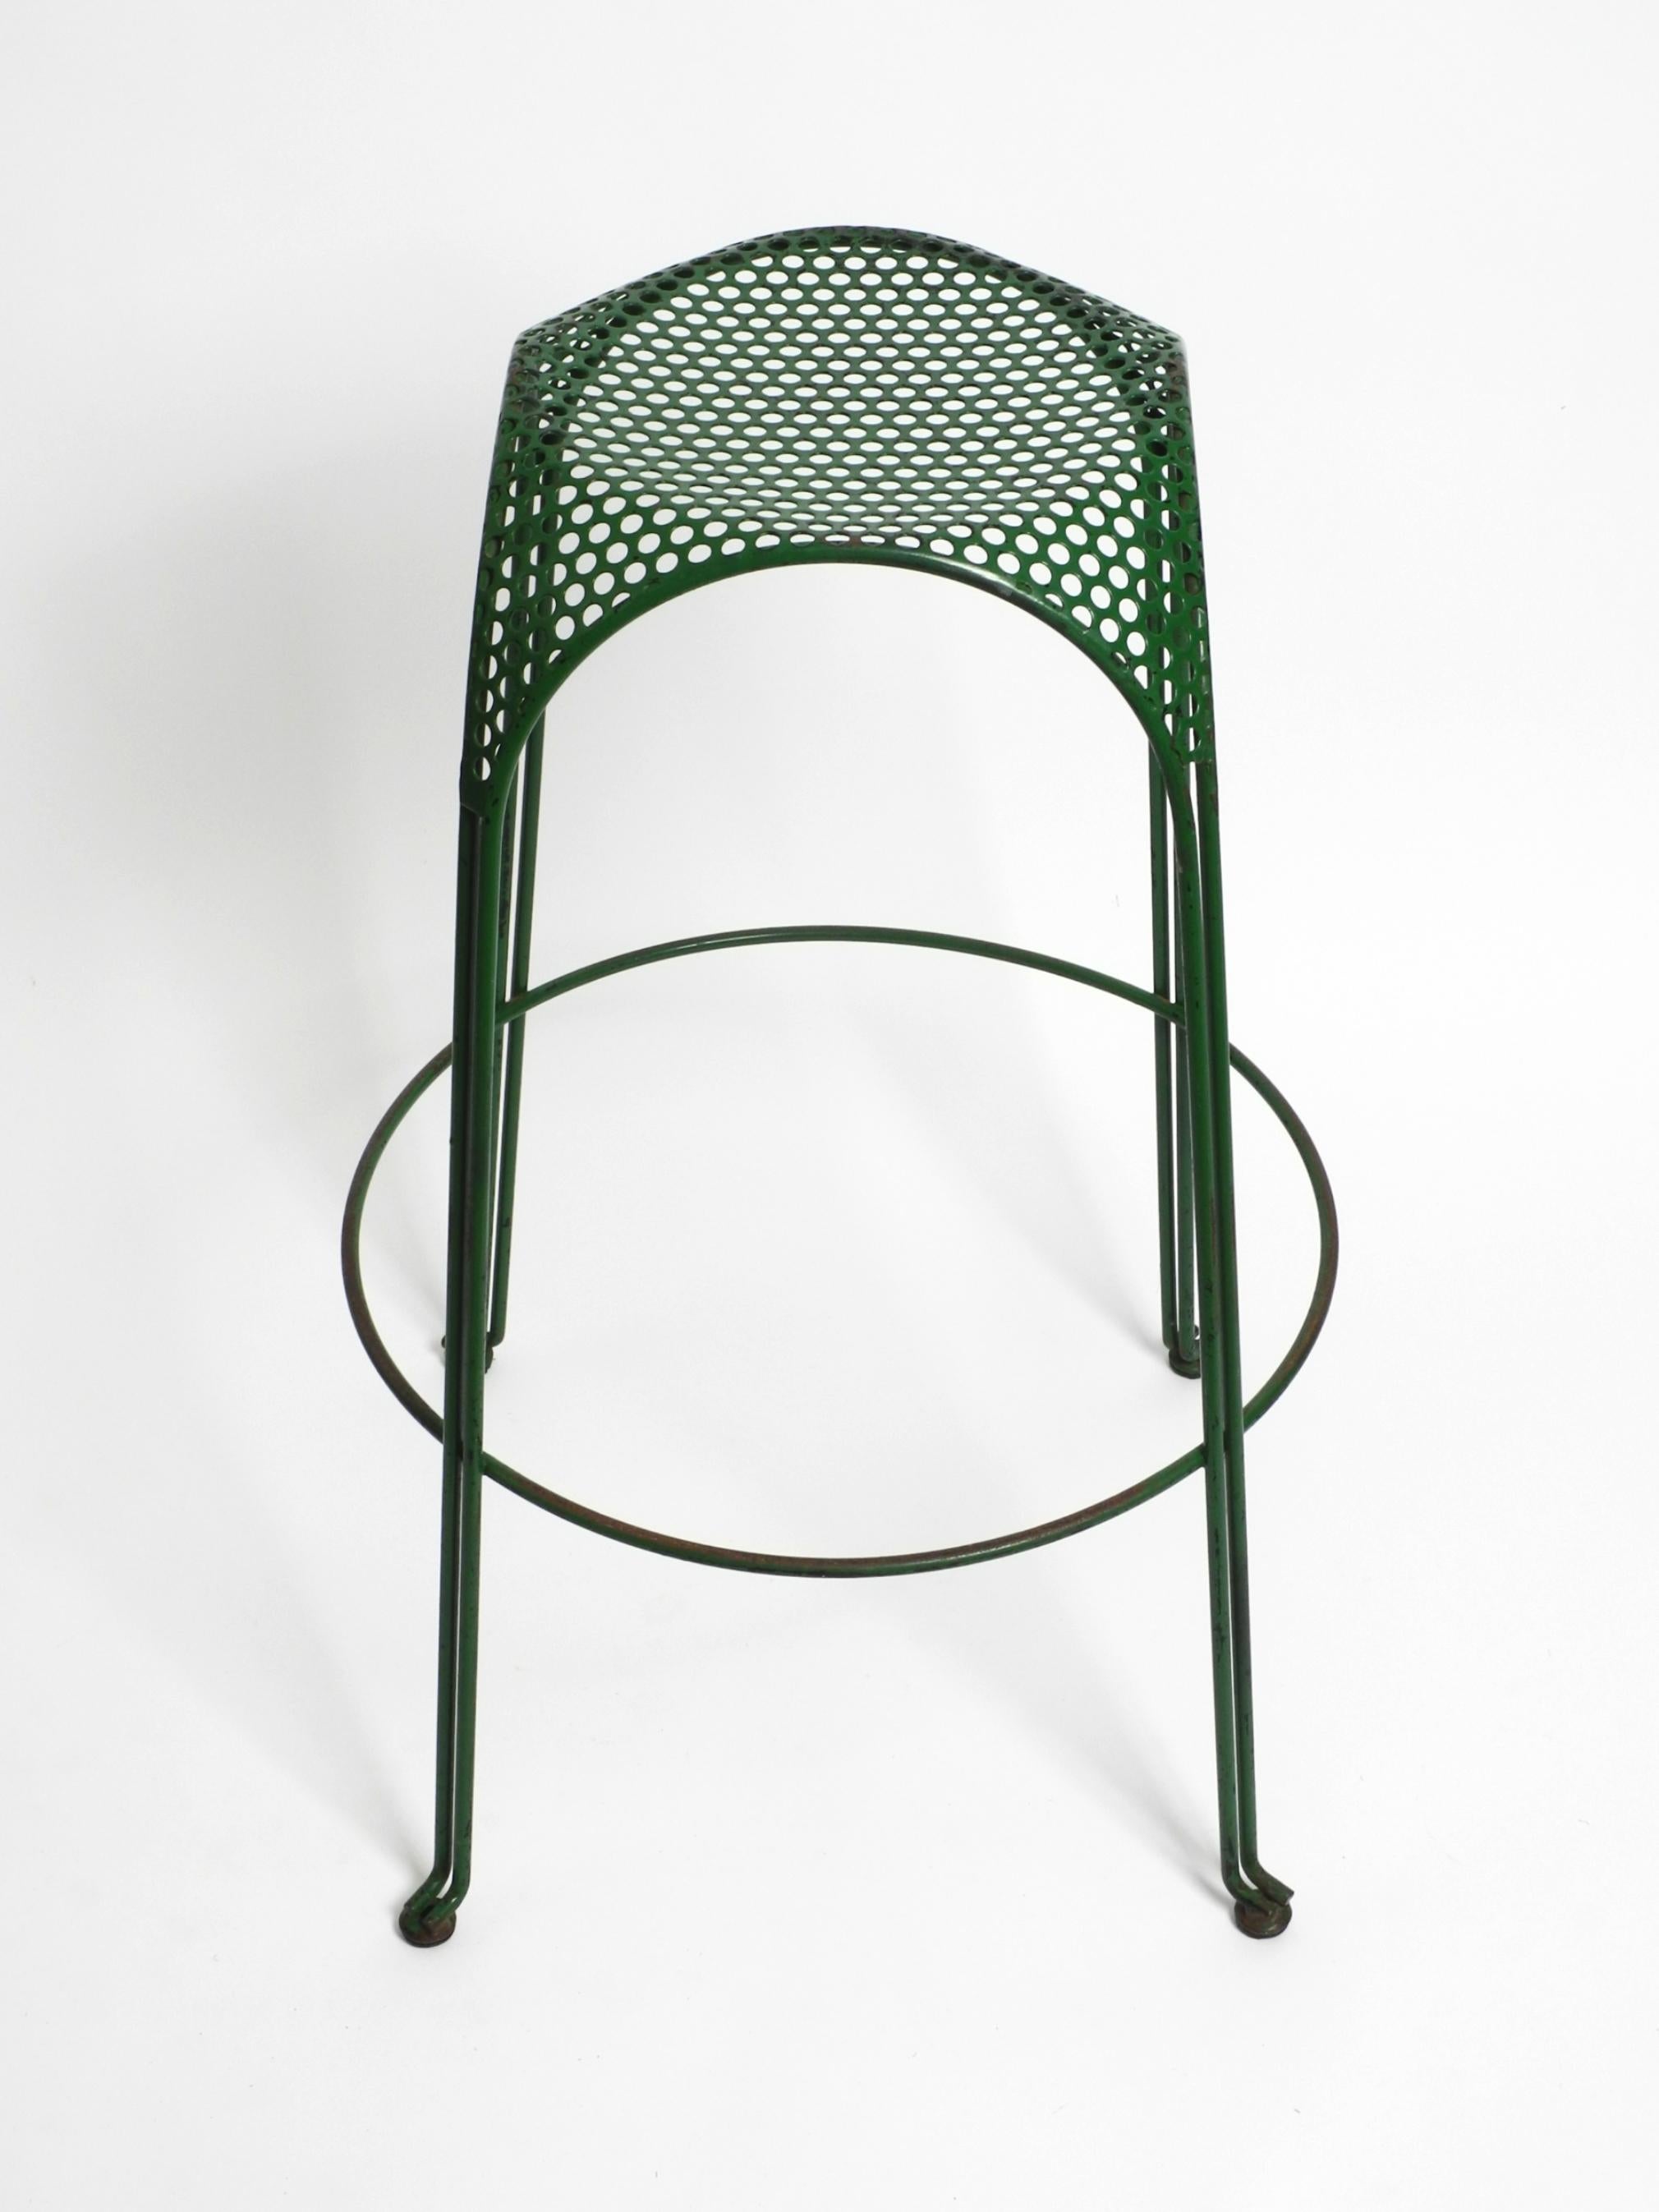 Mid-20th Century Italian 1960s bar stool made of green painted metal with perforated metal seat For Sale